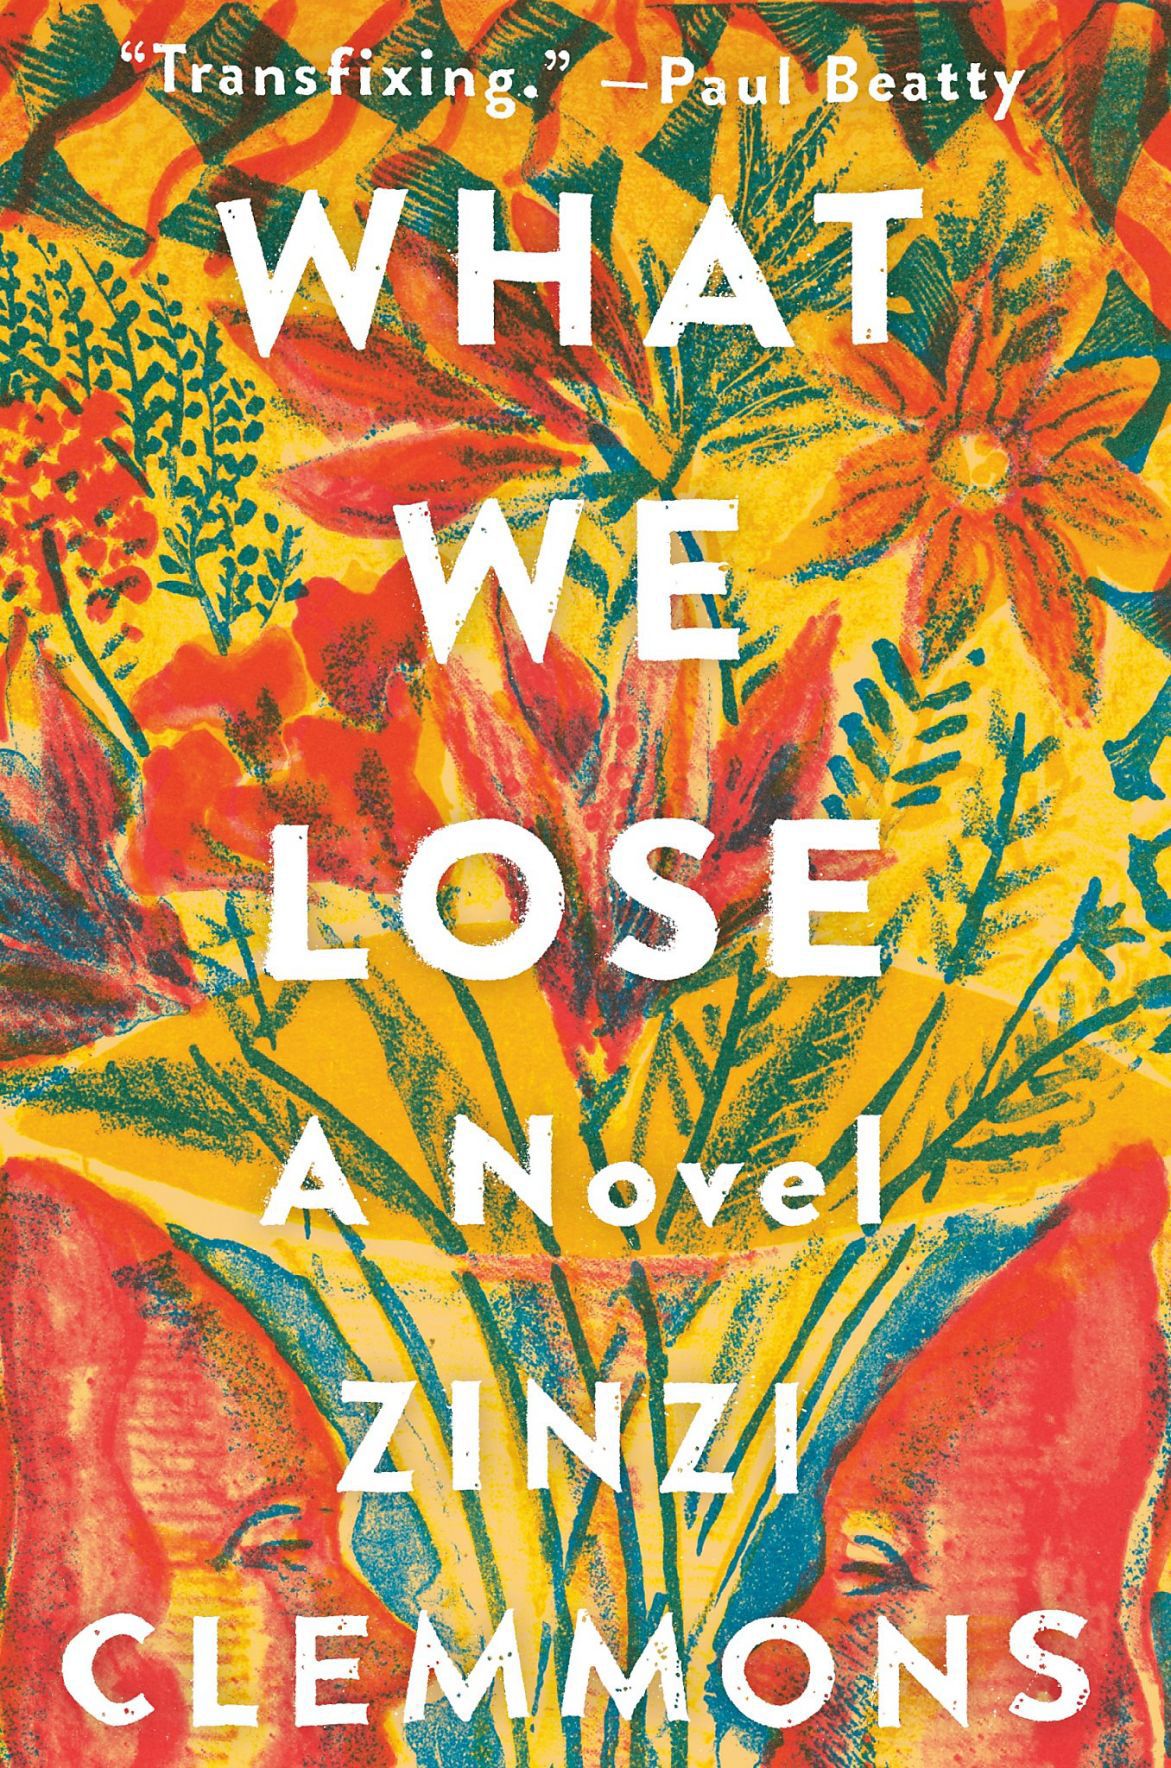 Zinzi Clemmons on her debut novel about loss, coming of age